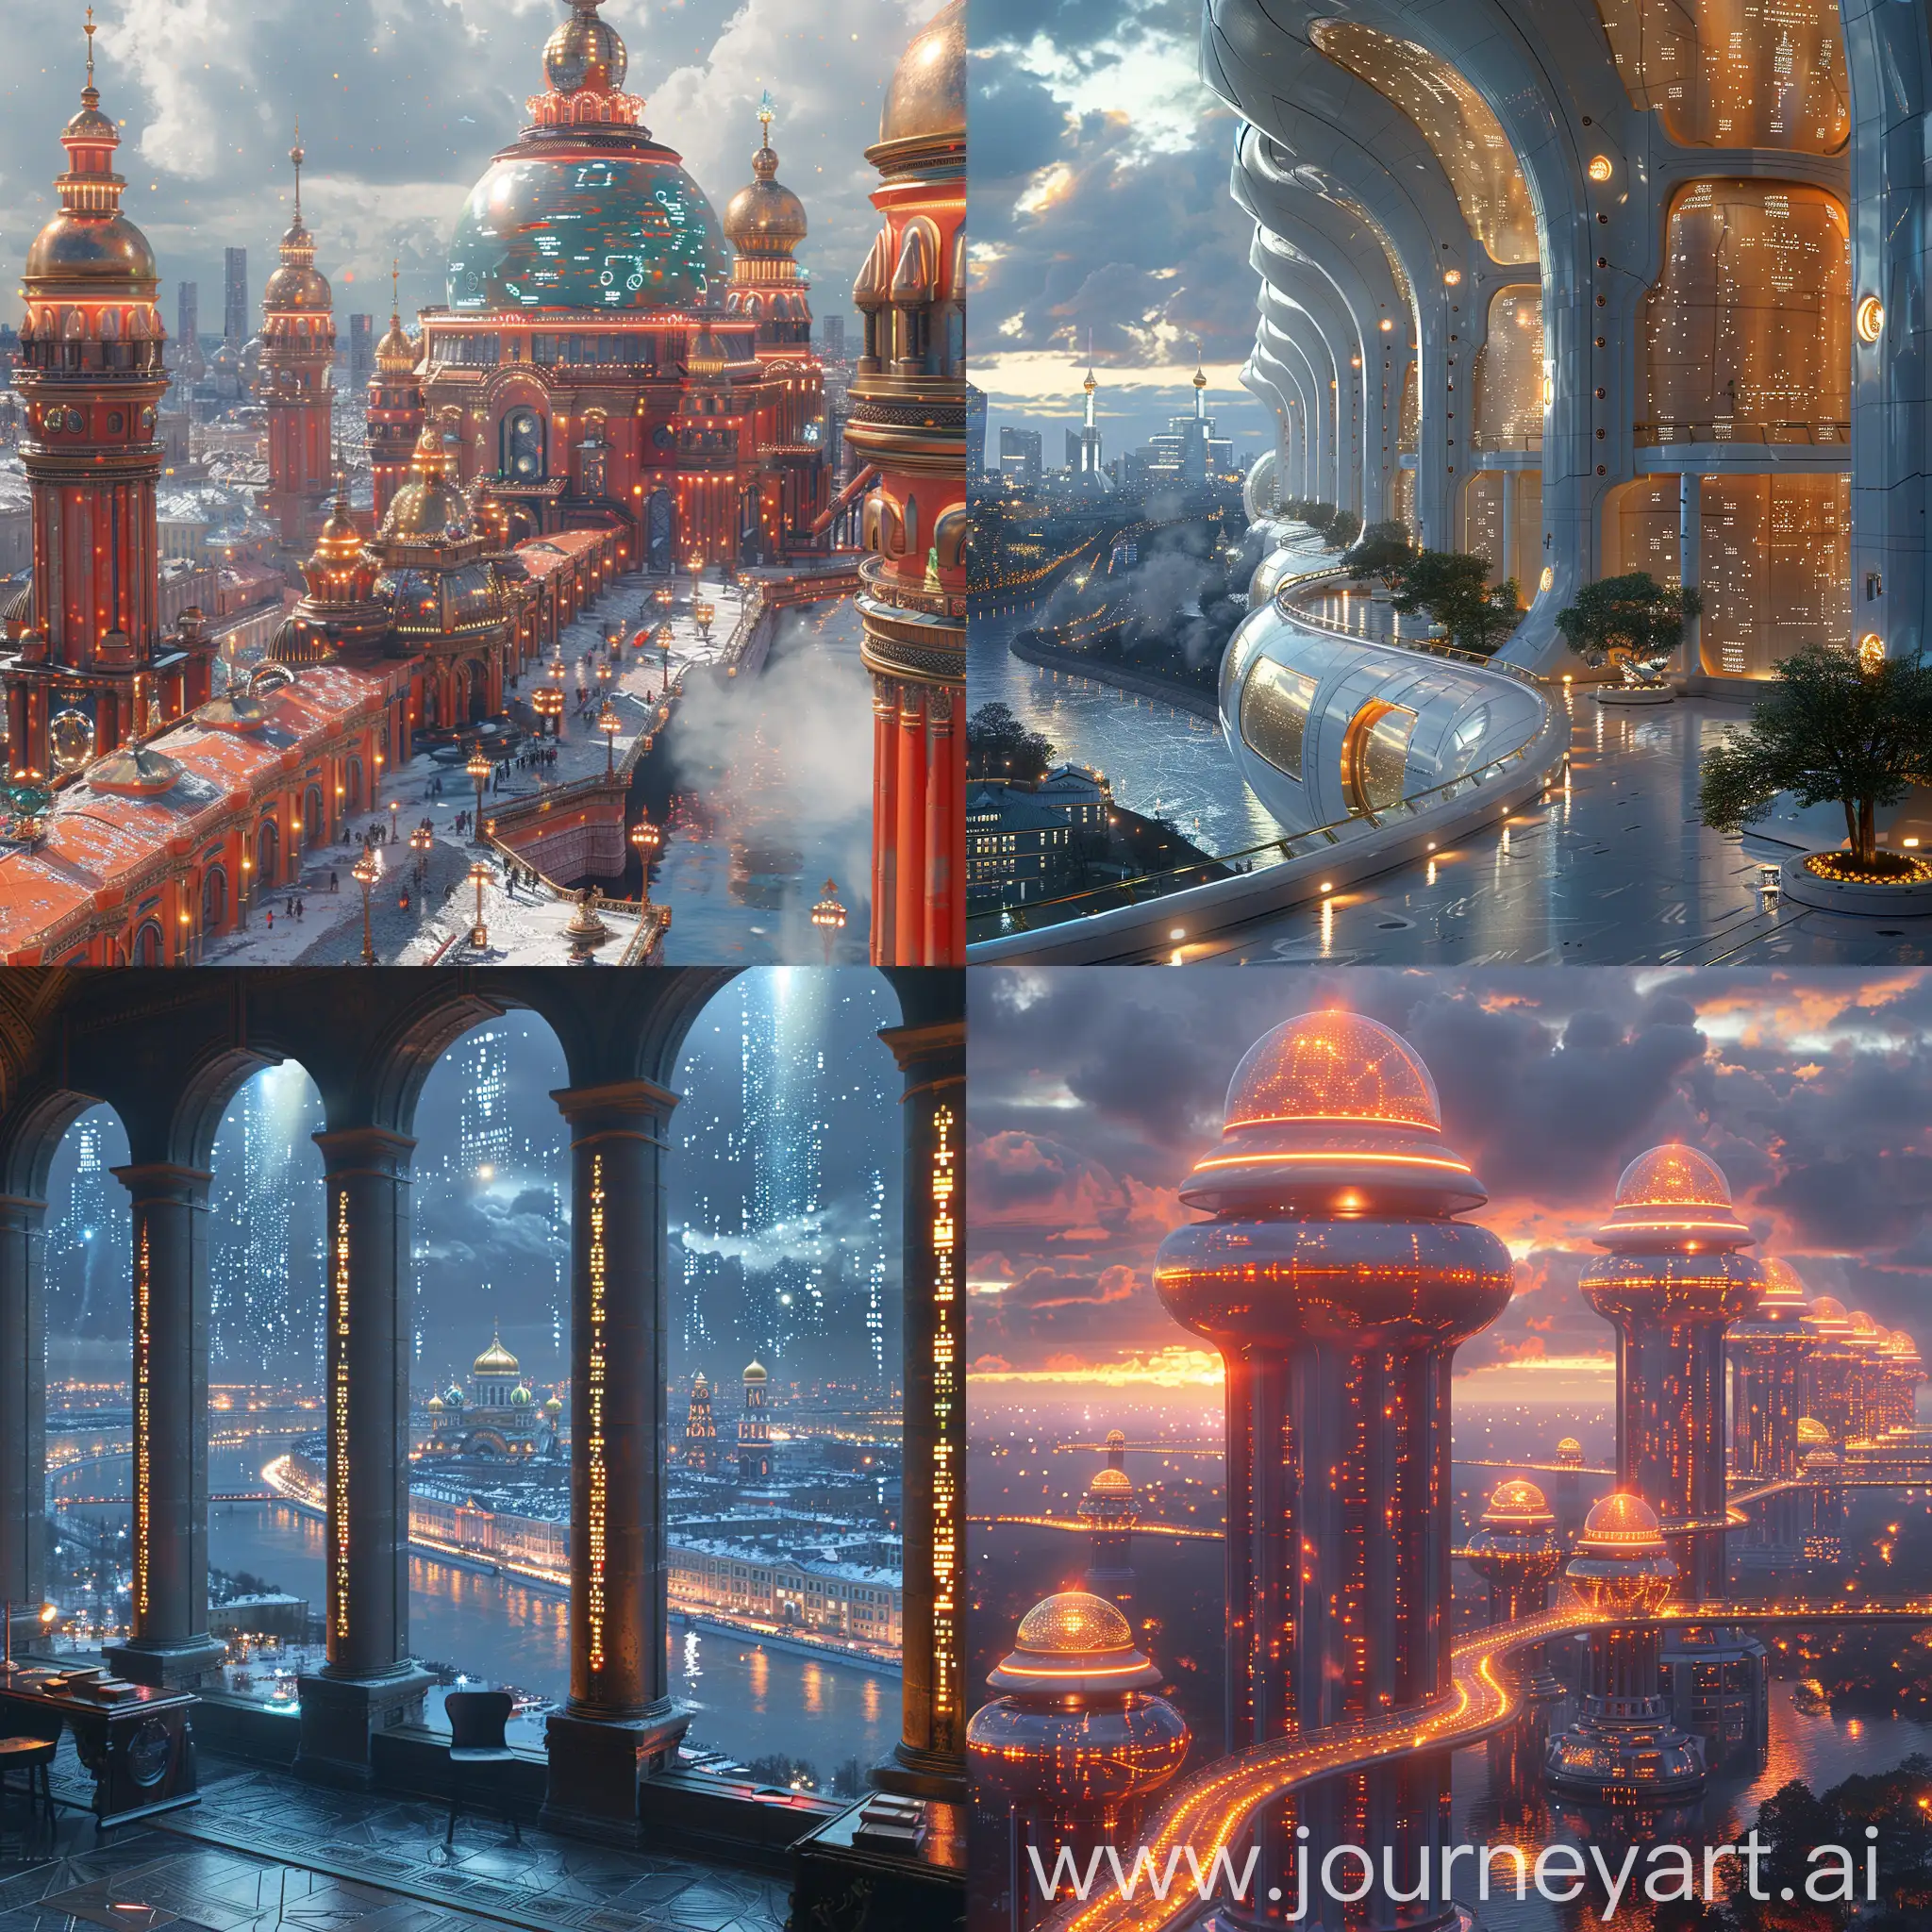 Futuristic-Saint-Petersburg-with-HighTech-Holographic-Style